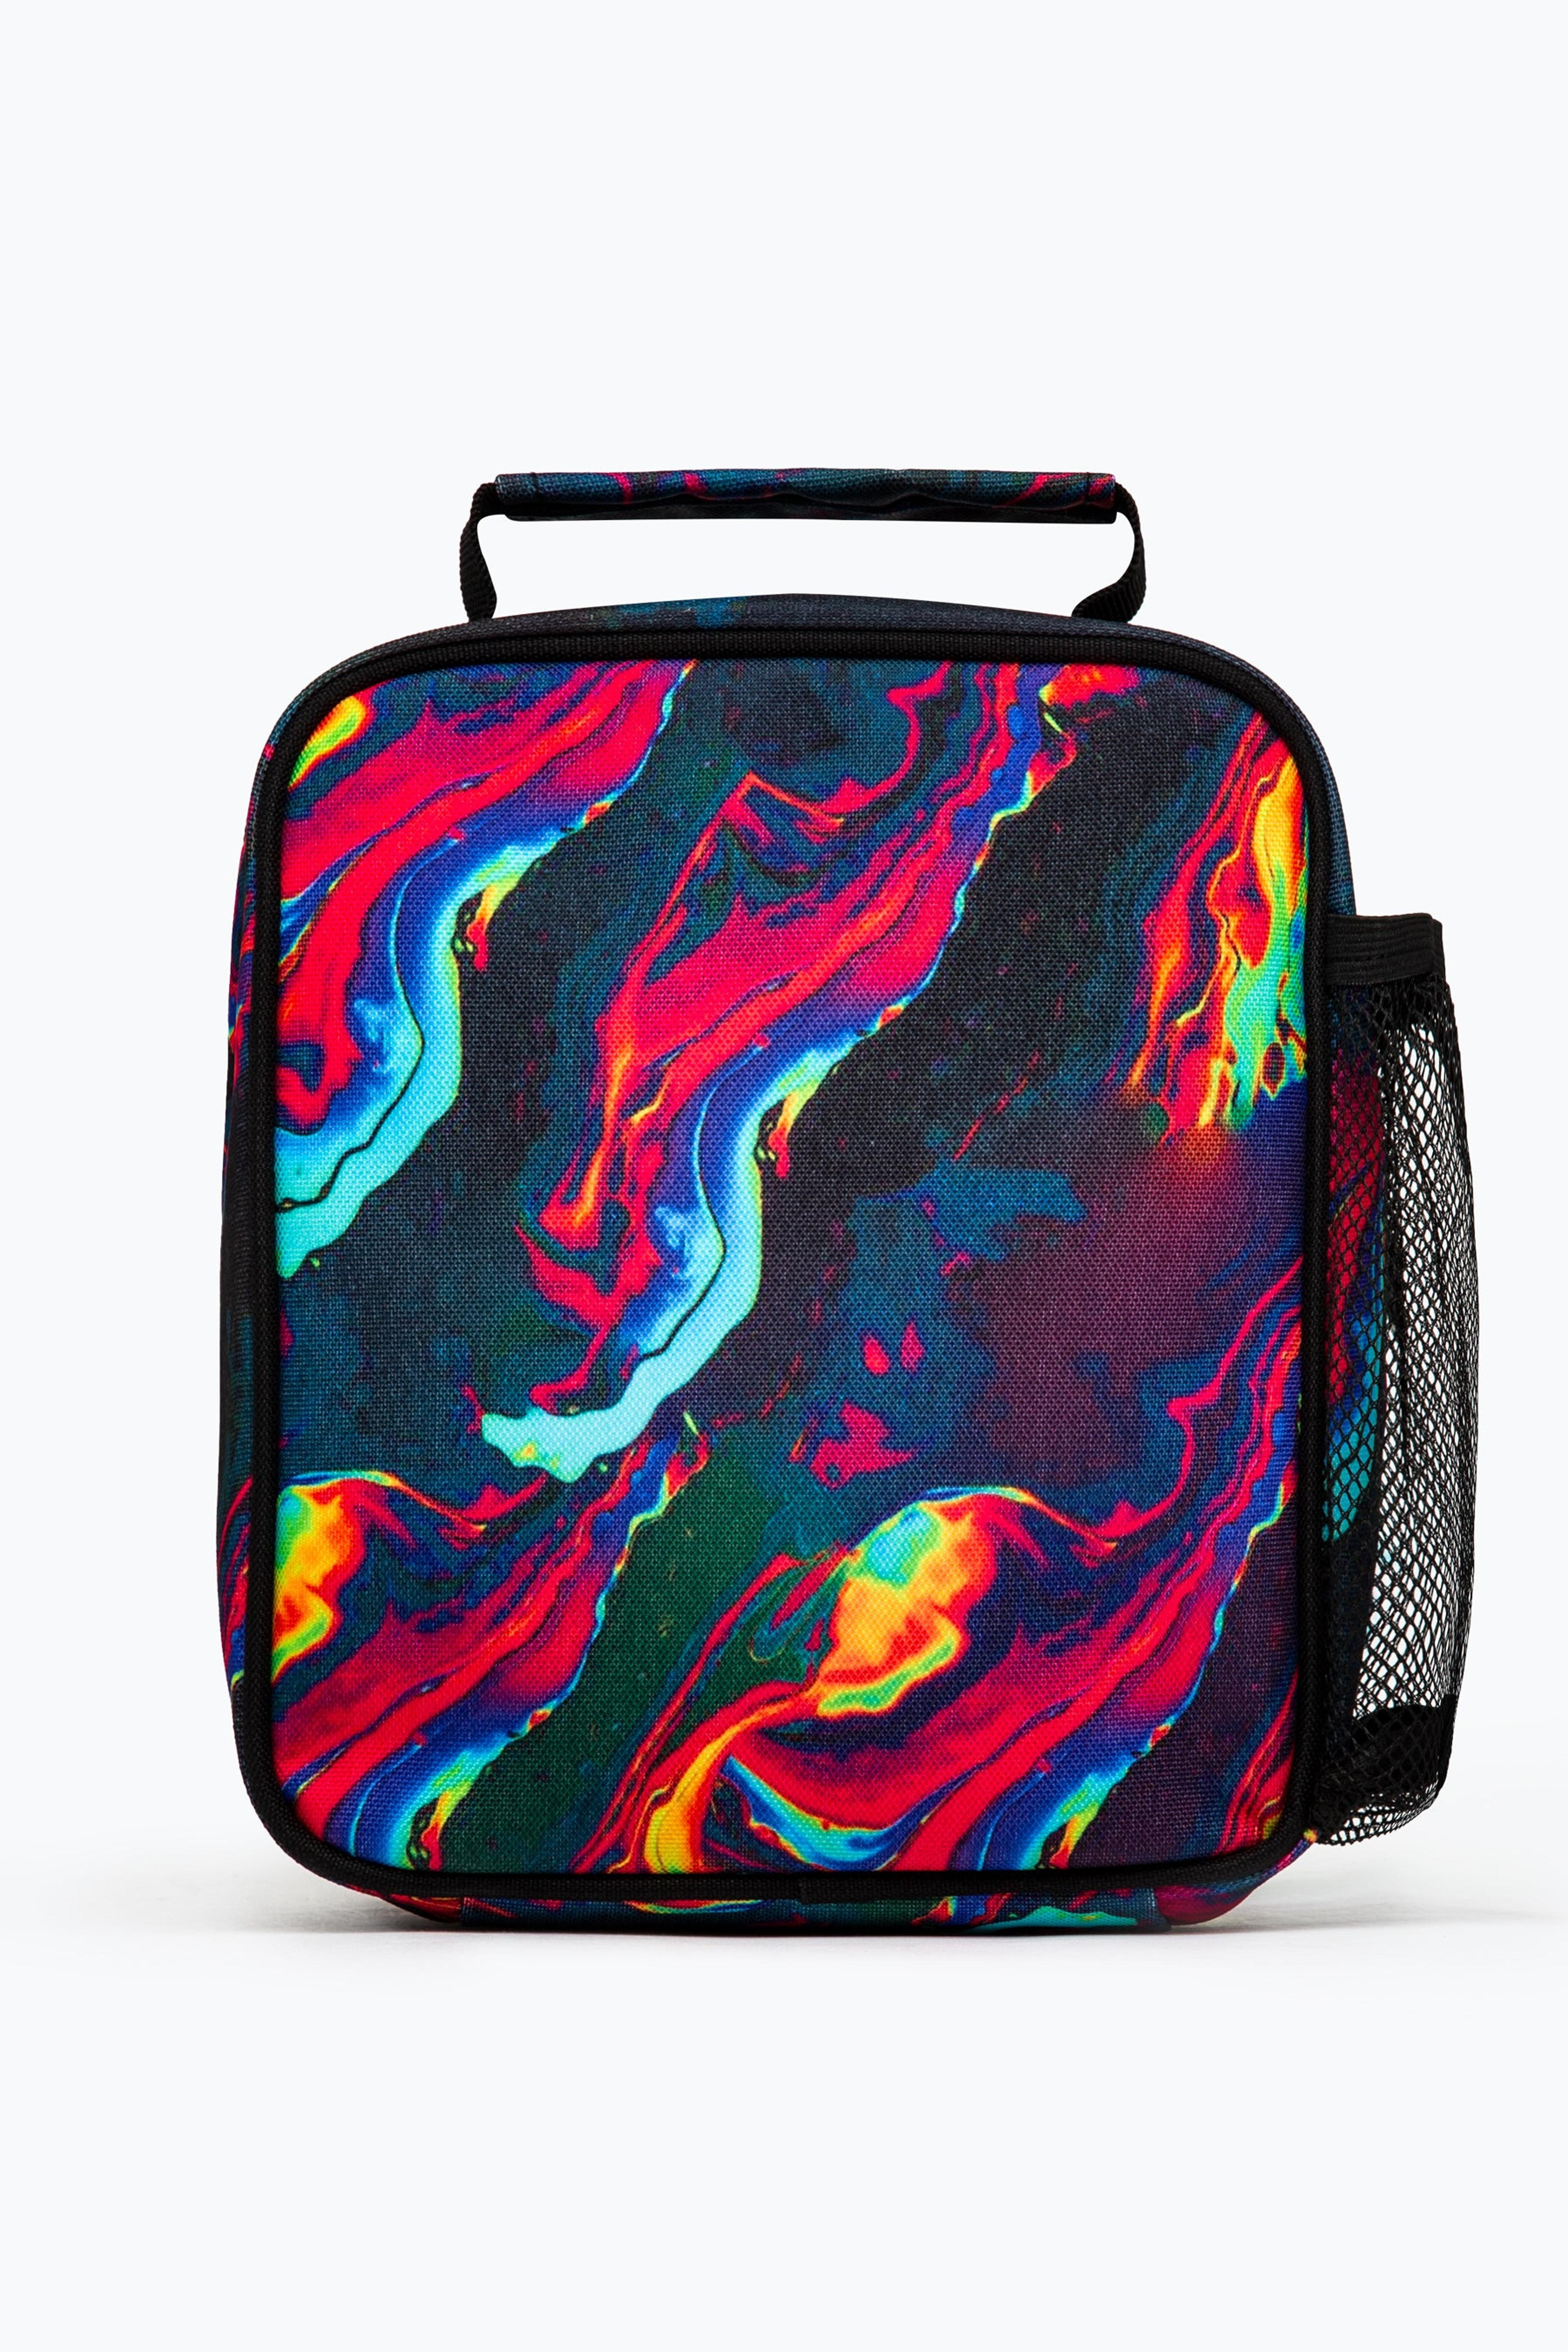 NTWRK - HYPE IRIDESCENT INFRARED MARBLE LUNCHBOX